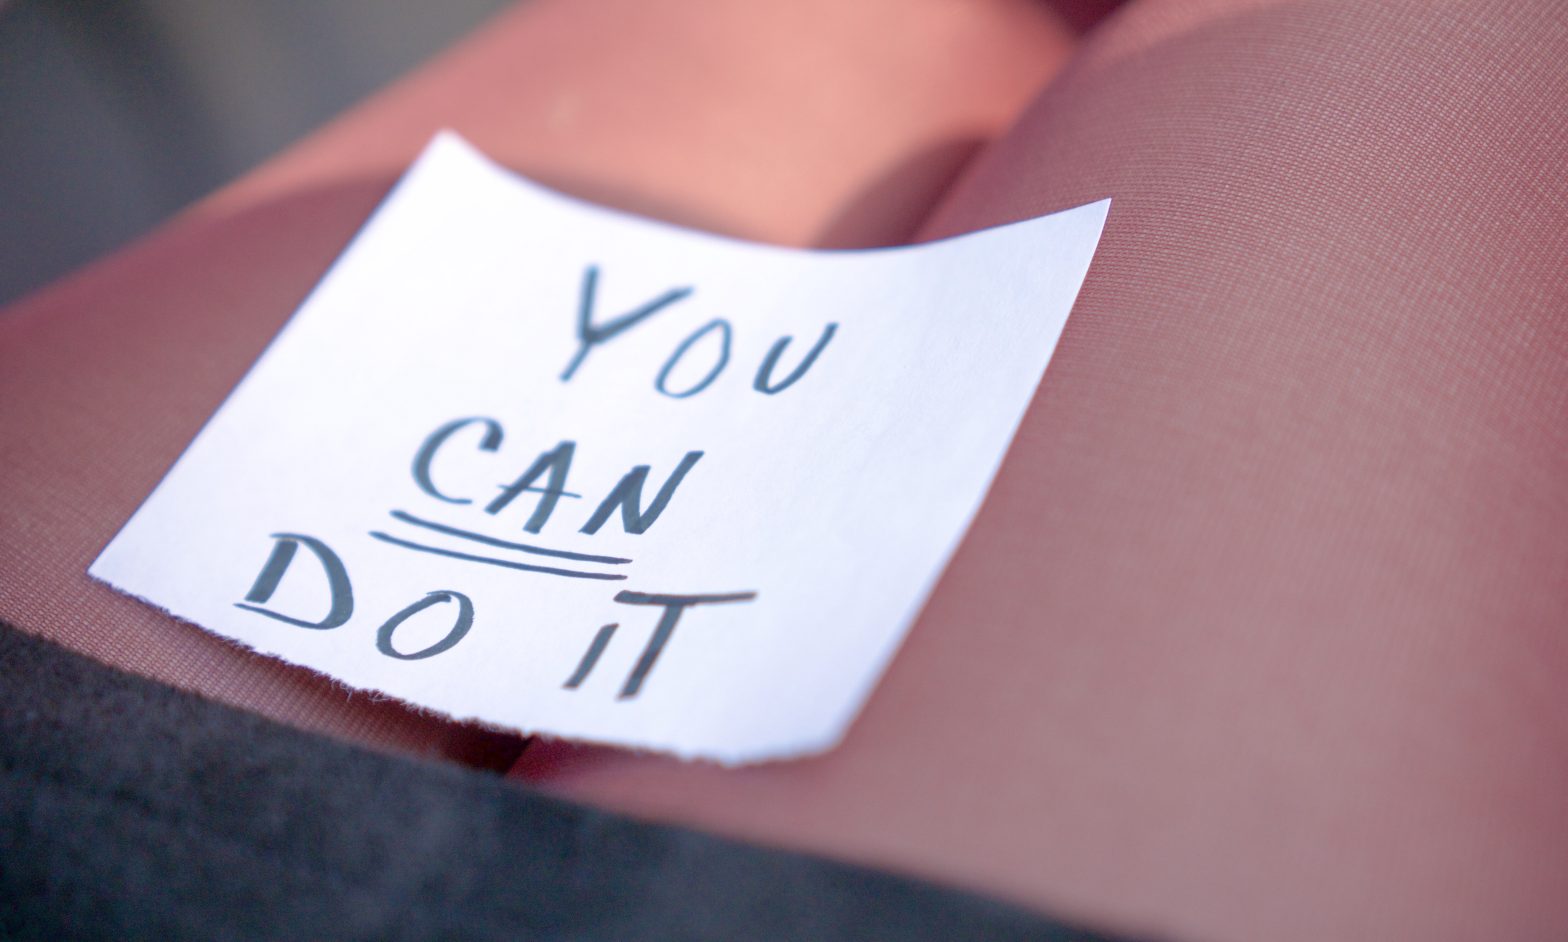 "You Can Do It' written on a note signifying the importance of National Sober Day